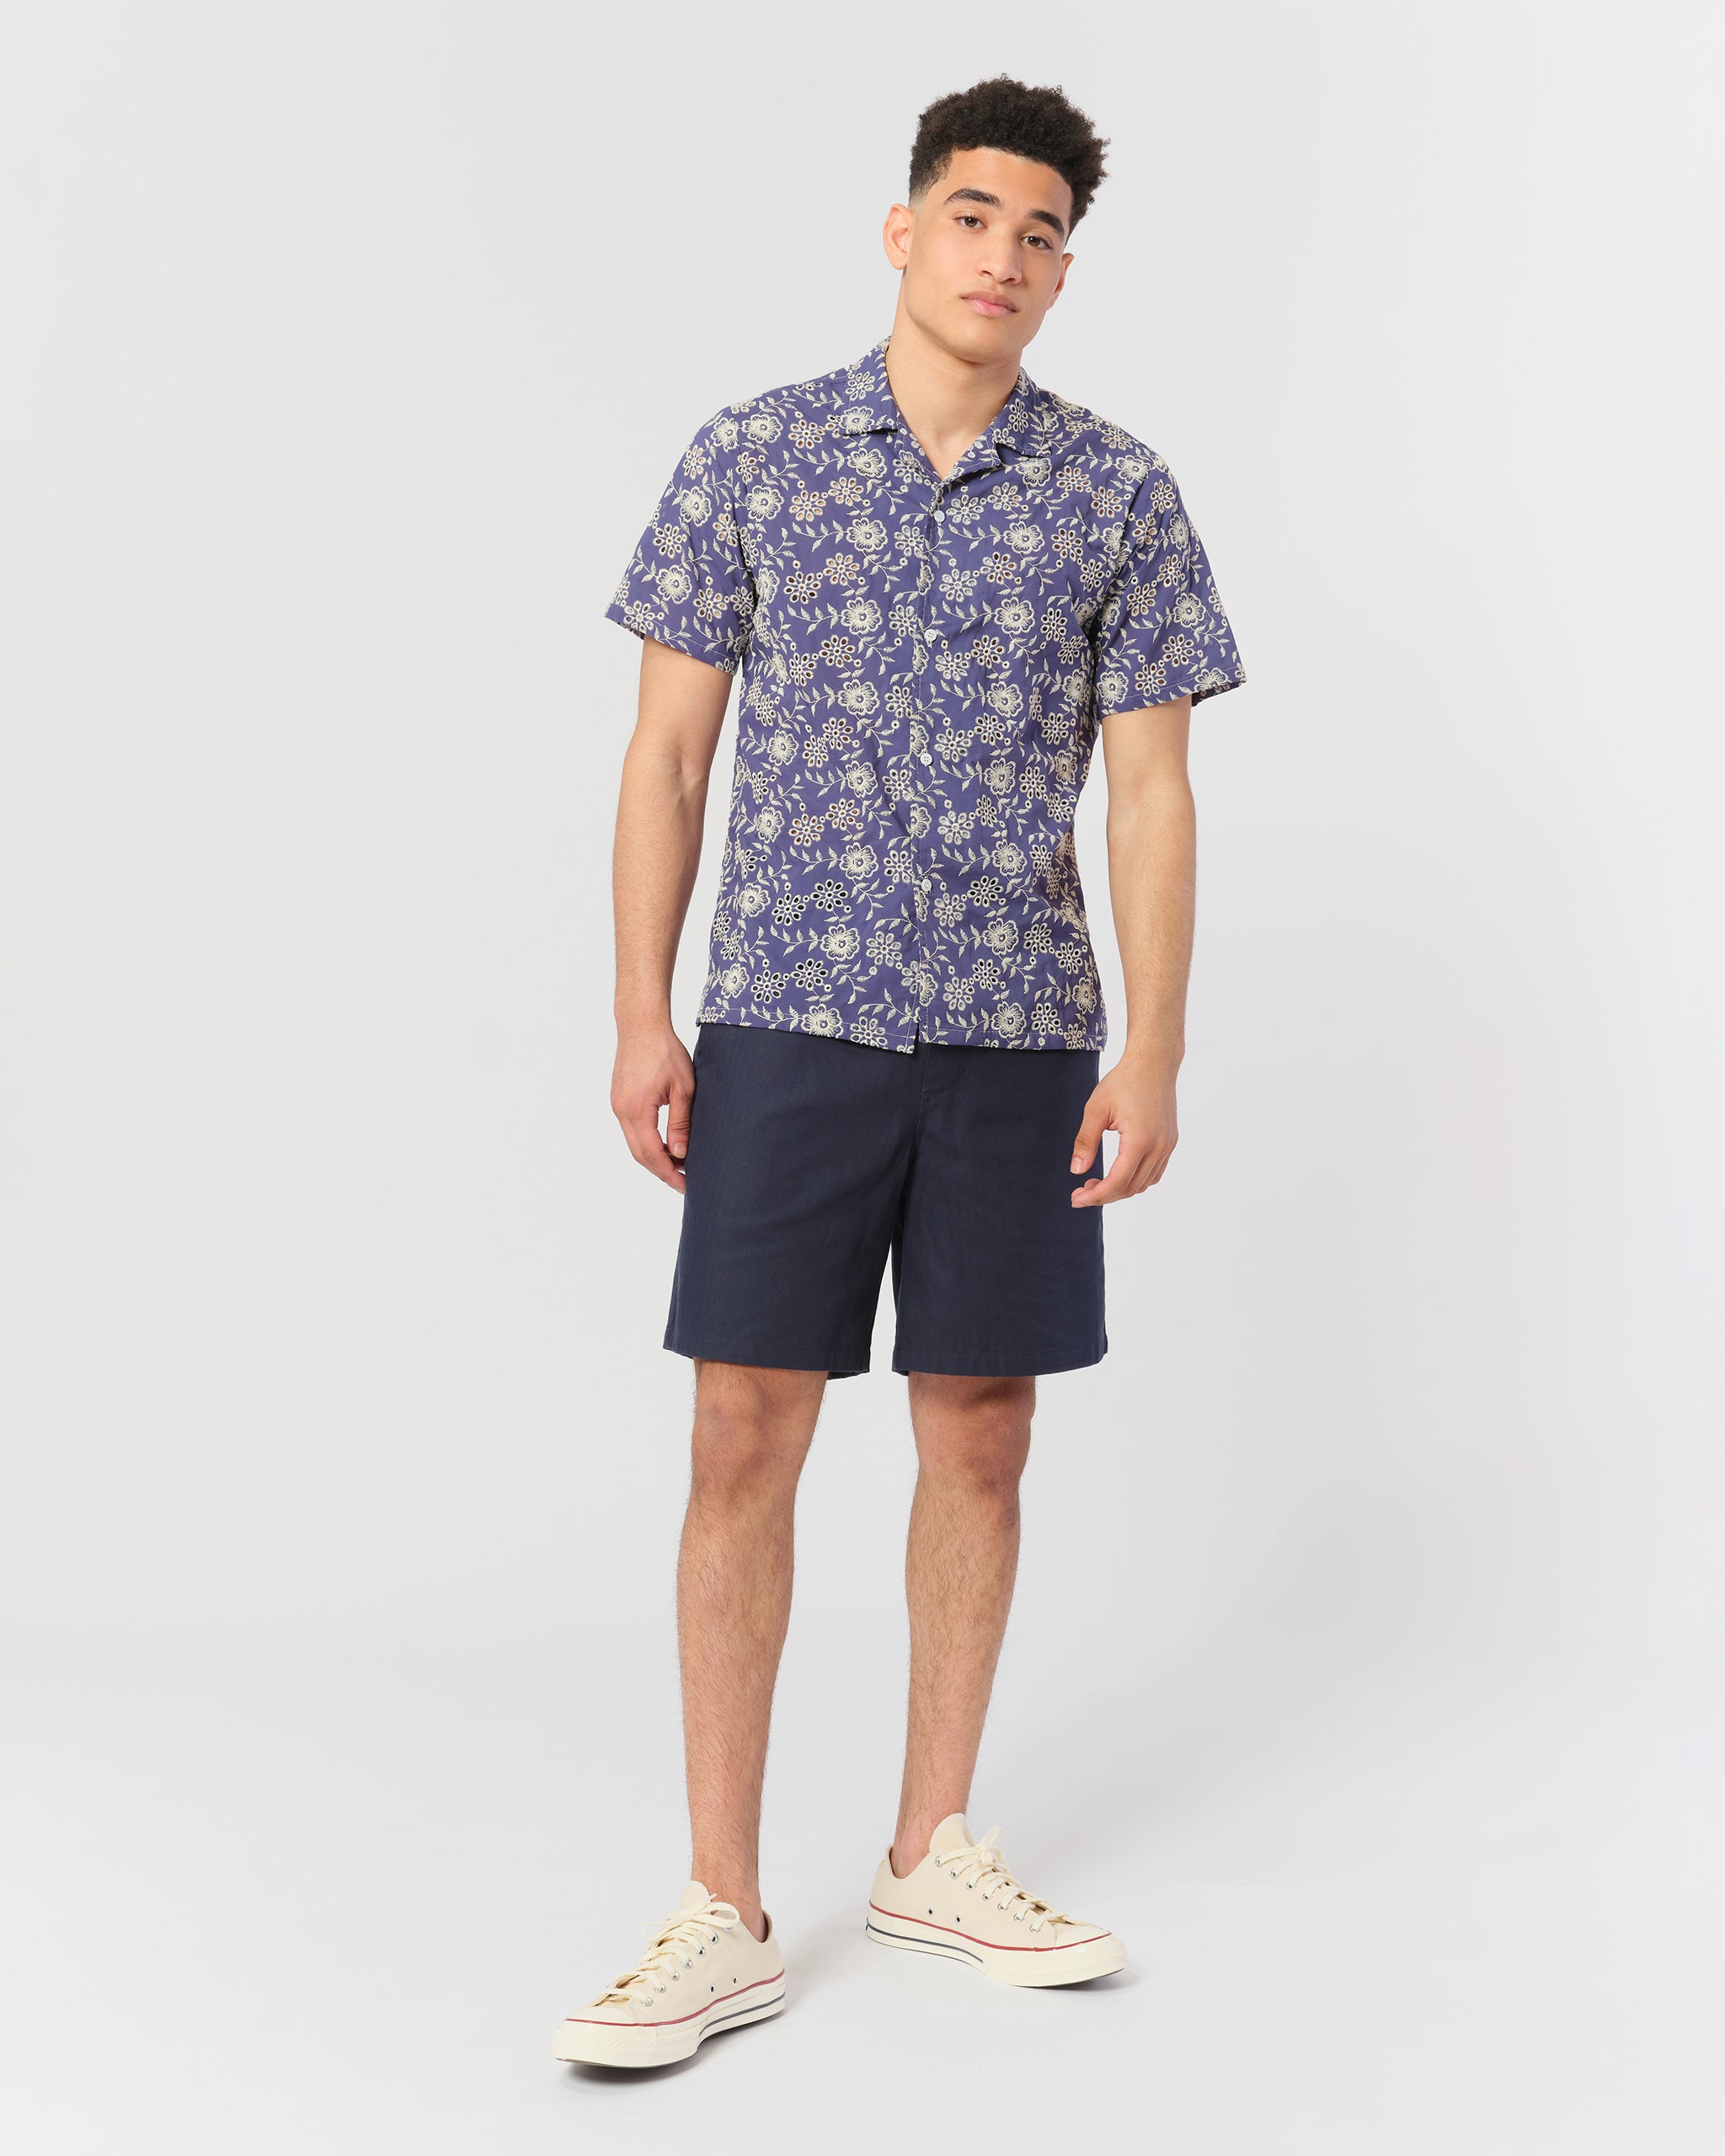 Blue camp shirt with an embroidered floral pattern shot on model